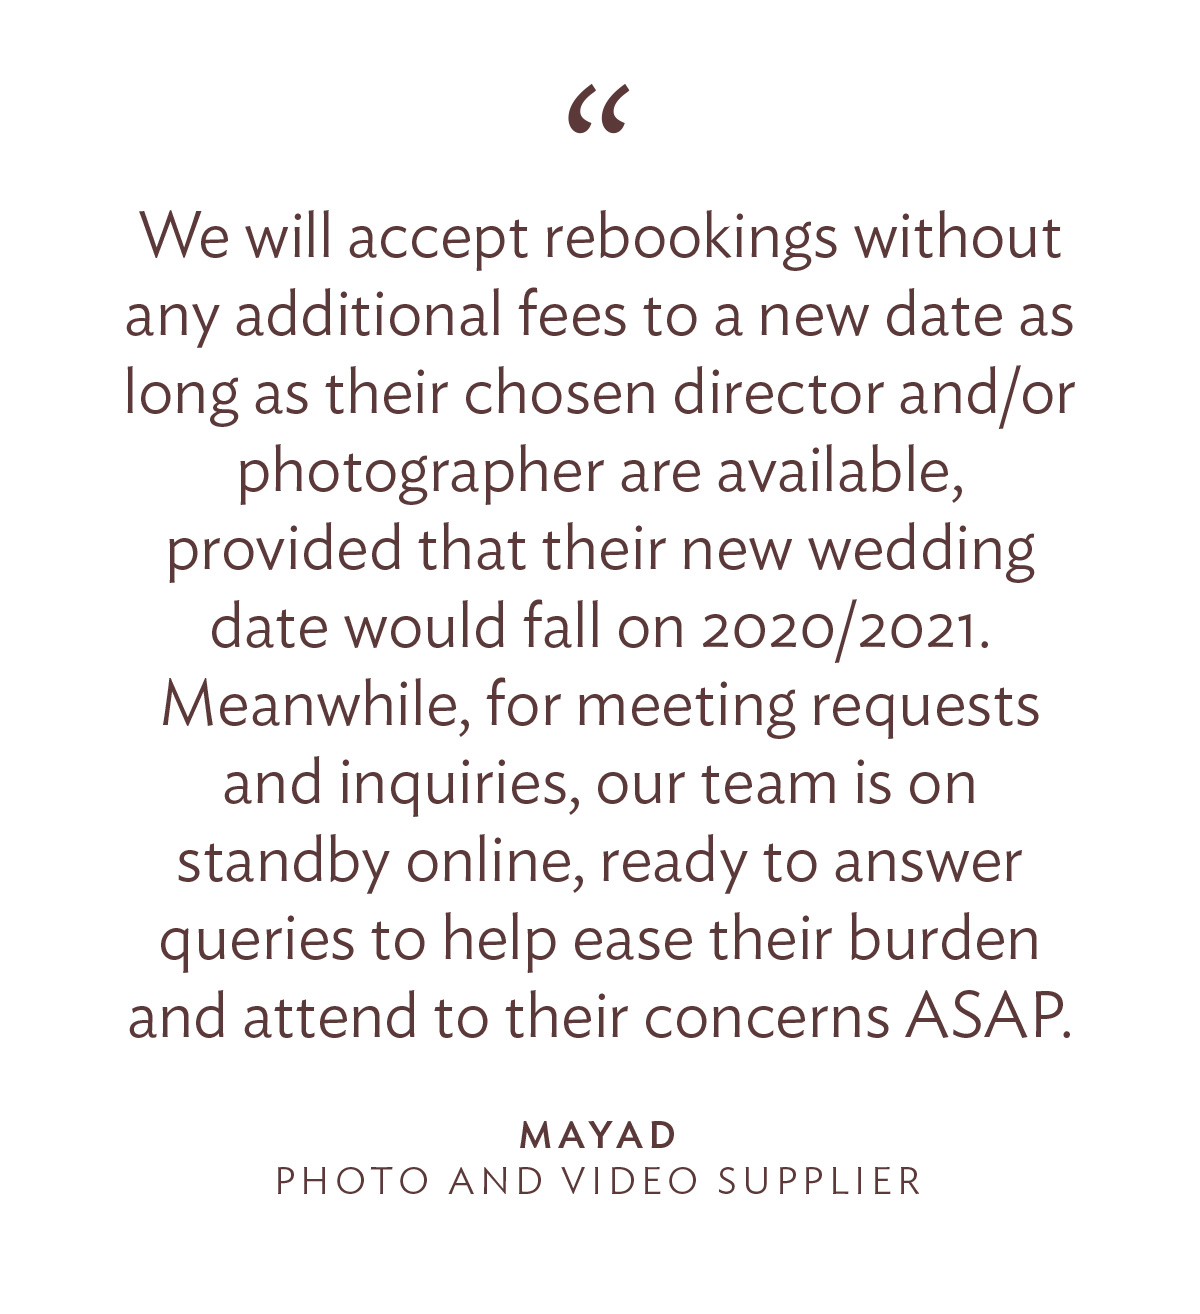 "We will accept rebookings without any additional fees to a new date as long as their chosen director and/or photographer are available, provided that their new wedding date would fall on 2020/2021. Meanwhile, for meeting requests and inquiries, our team is on standby online, ready to answer queries to help ease their burden and attend to their concerns ASAP. -Mayad, Photo and Video Supplier"